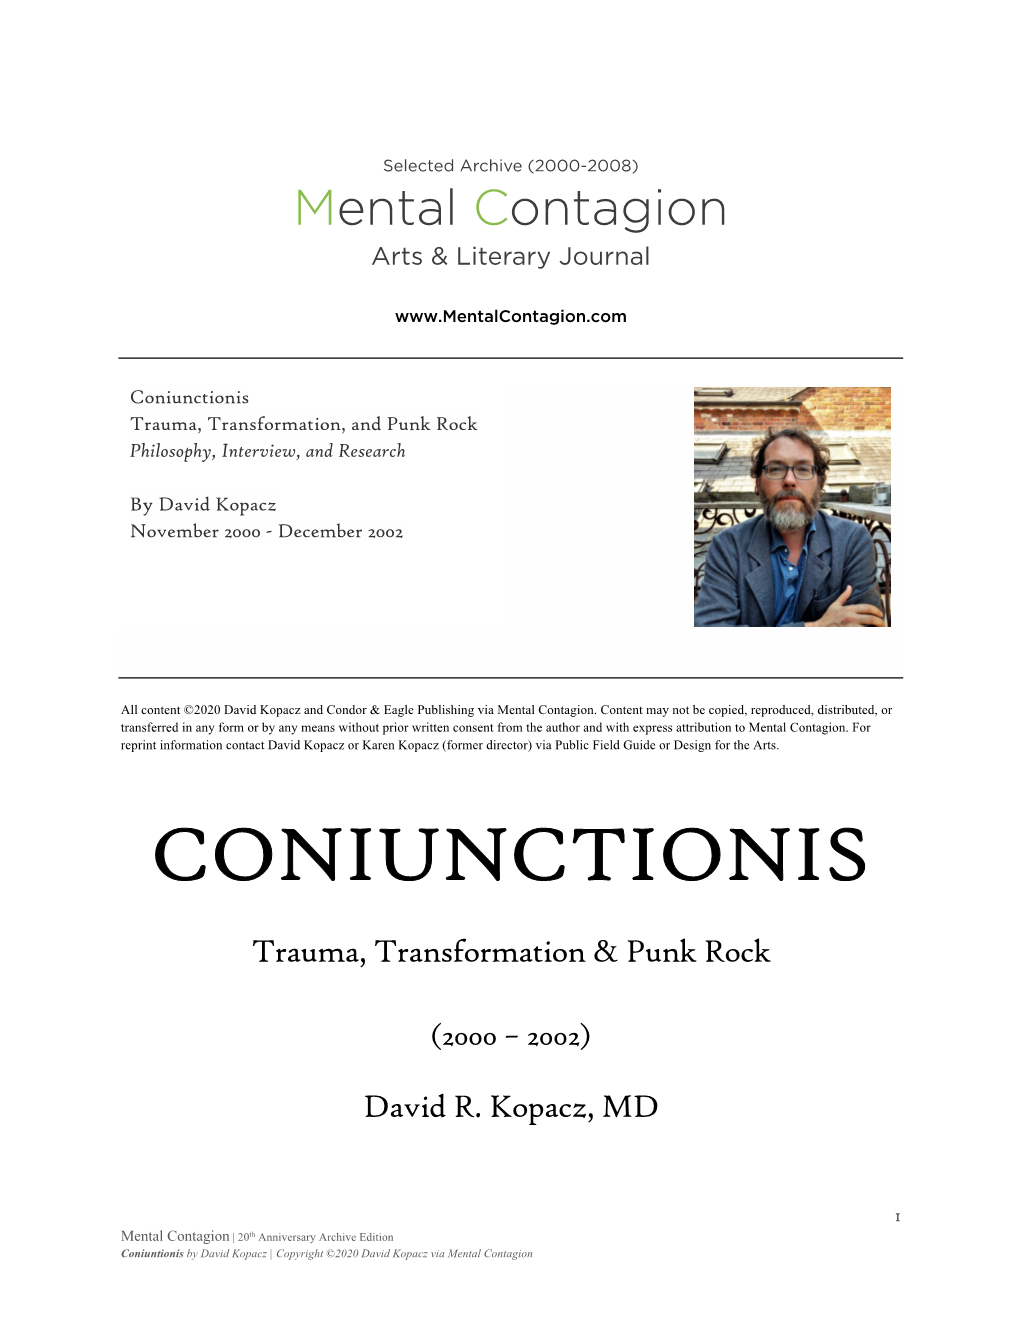 Coniunctionis Trauma, Transformation, and Punk Rock Philosophy, Interview, and Research